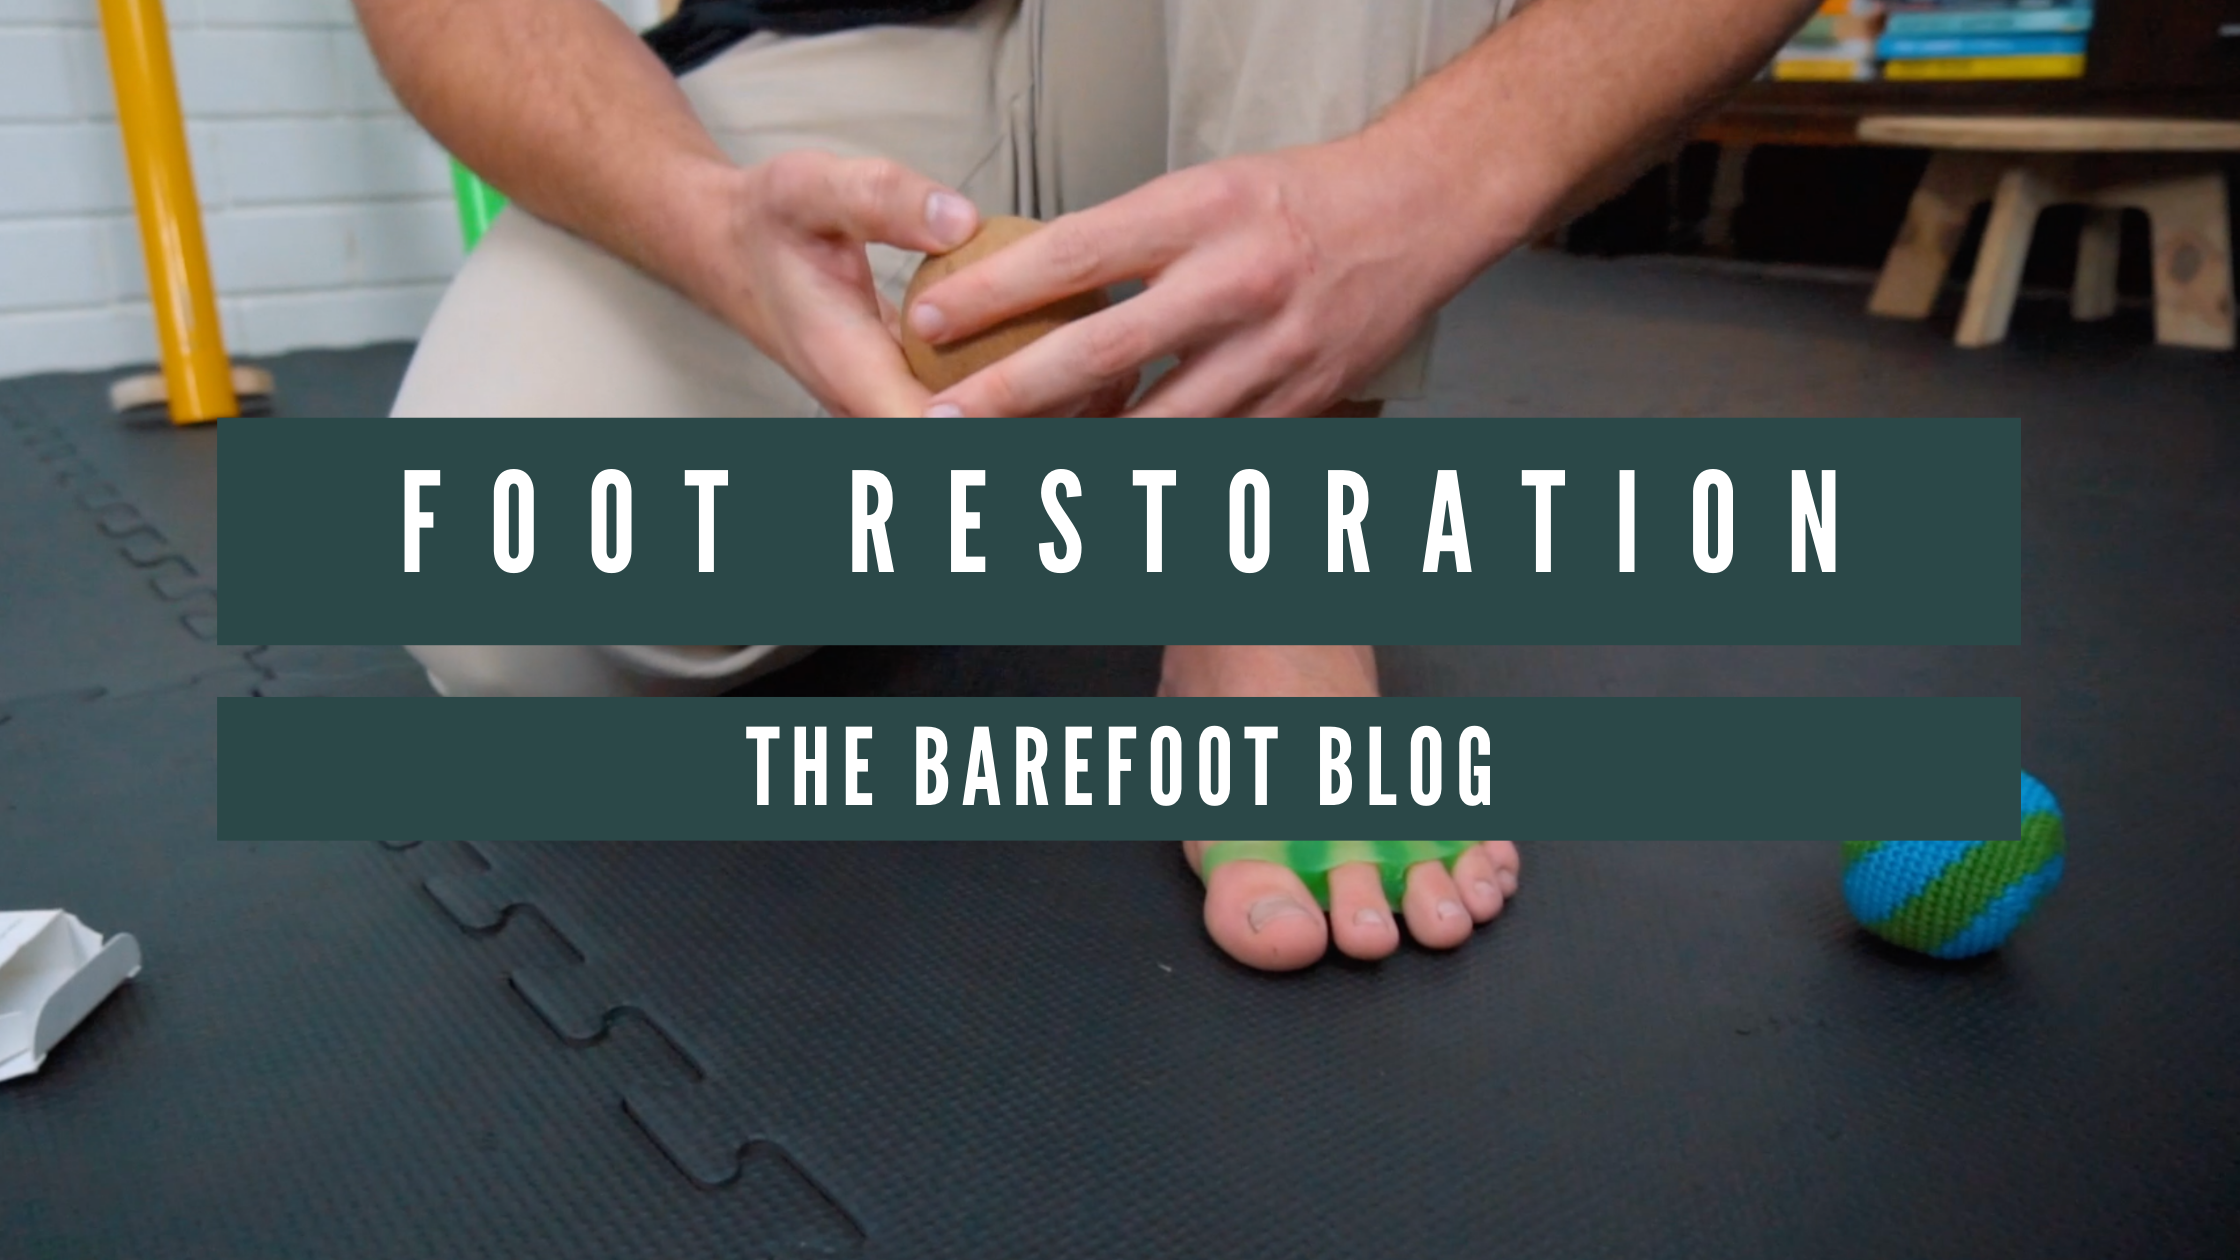 5 Ways To Restore Natural Foot Function